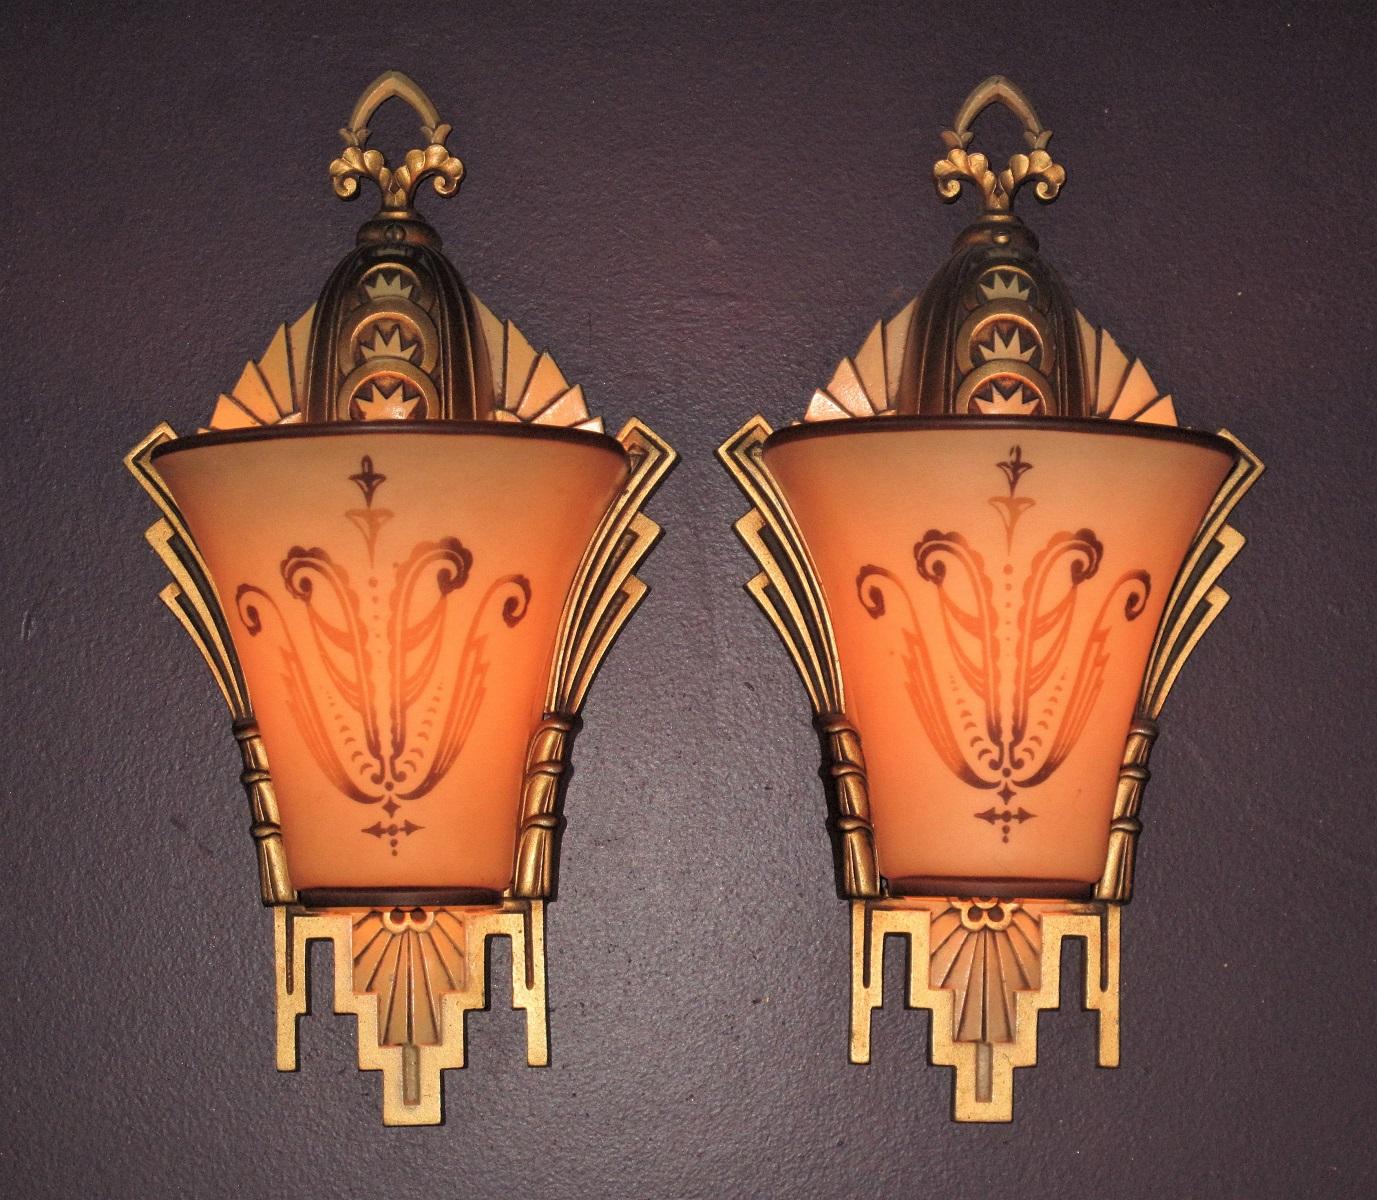 Large, Rare Beardslee Chandelier with Matching Sconces For Sale 3